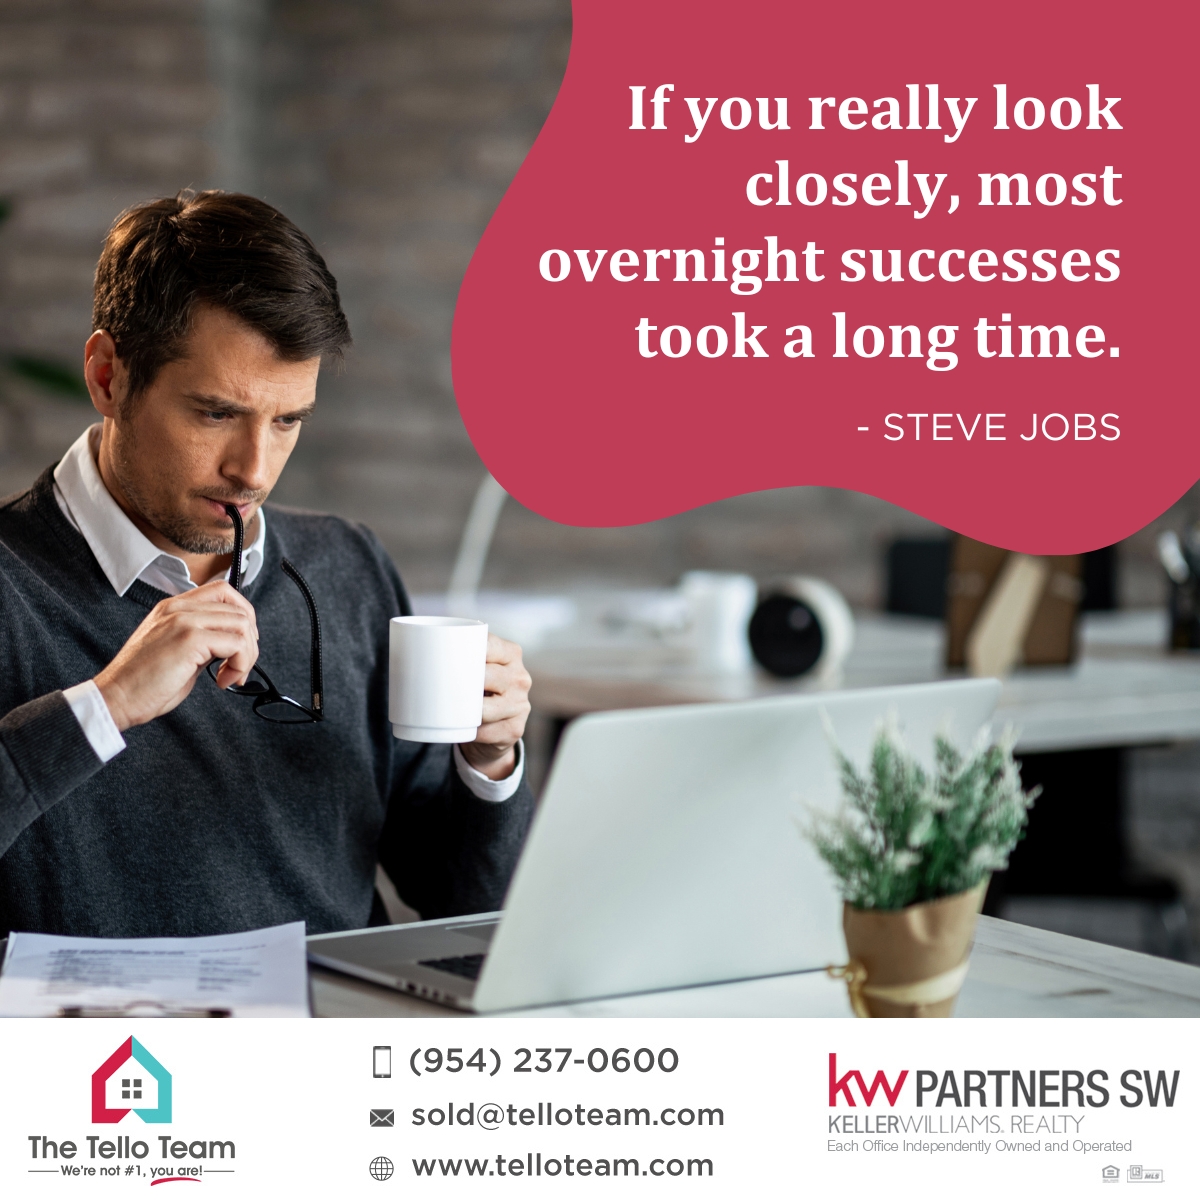 “If you really look closely, most overnight successes took a long time.” - Steve Jobs

Looking to buy/sell a house? Contact a realtor you can trust 📲+1 954-237-0600

#realestatebroker #realestatemiami #realestateflorida #floridarealtor #floridarealtors #floridarealestate